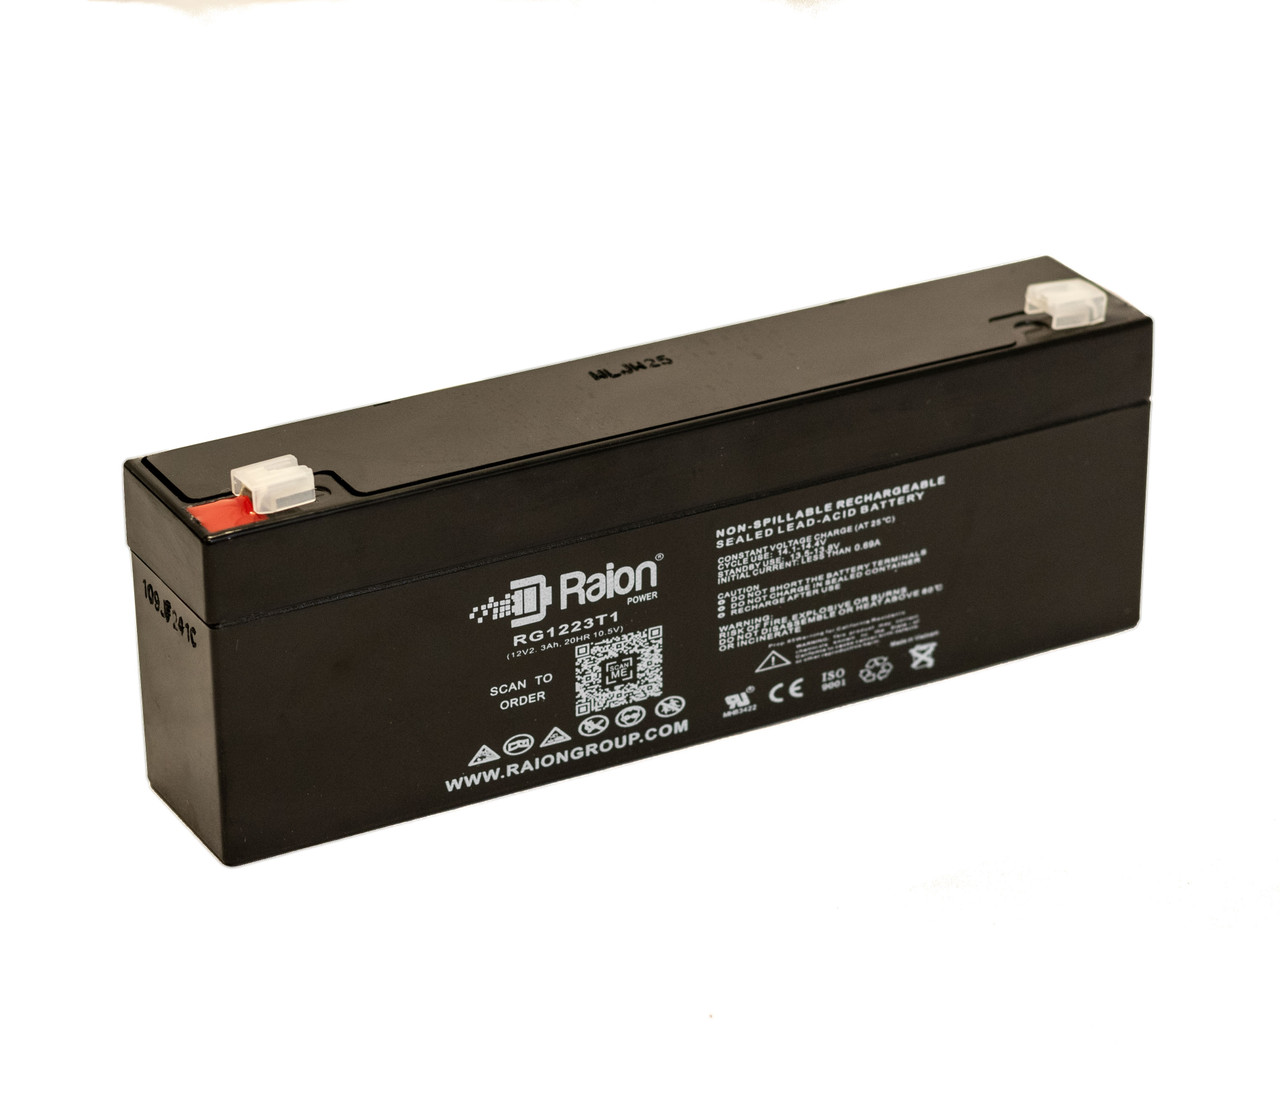 Raion Power RG1223T1 Replacement Battery for Medical Research Lab 500 Porta Pak Defibrillator